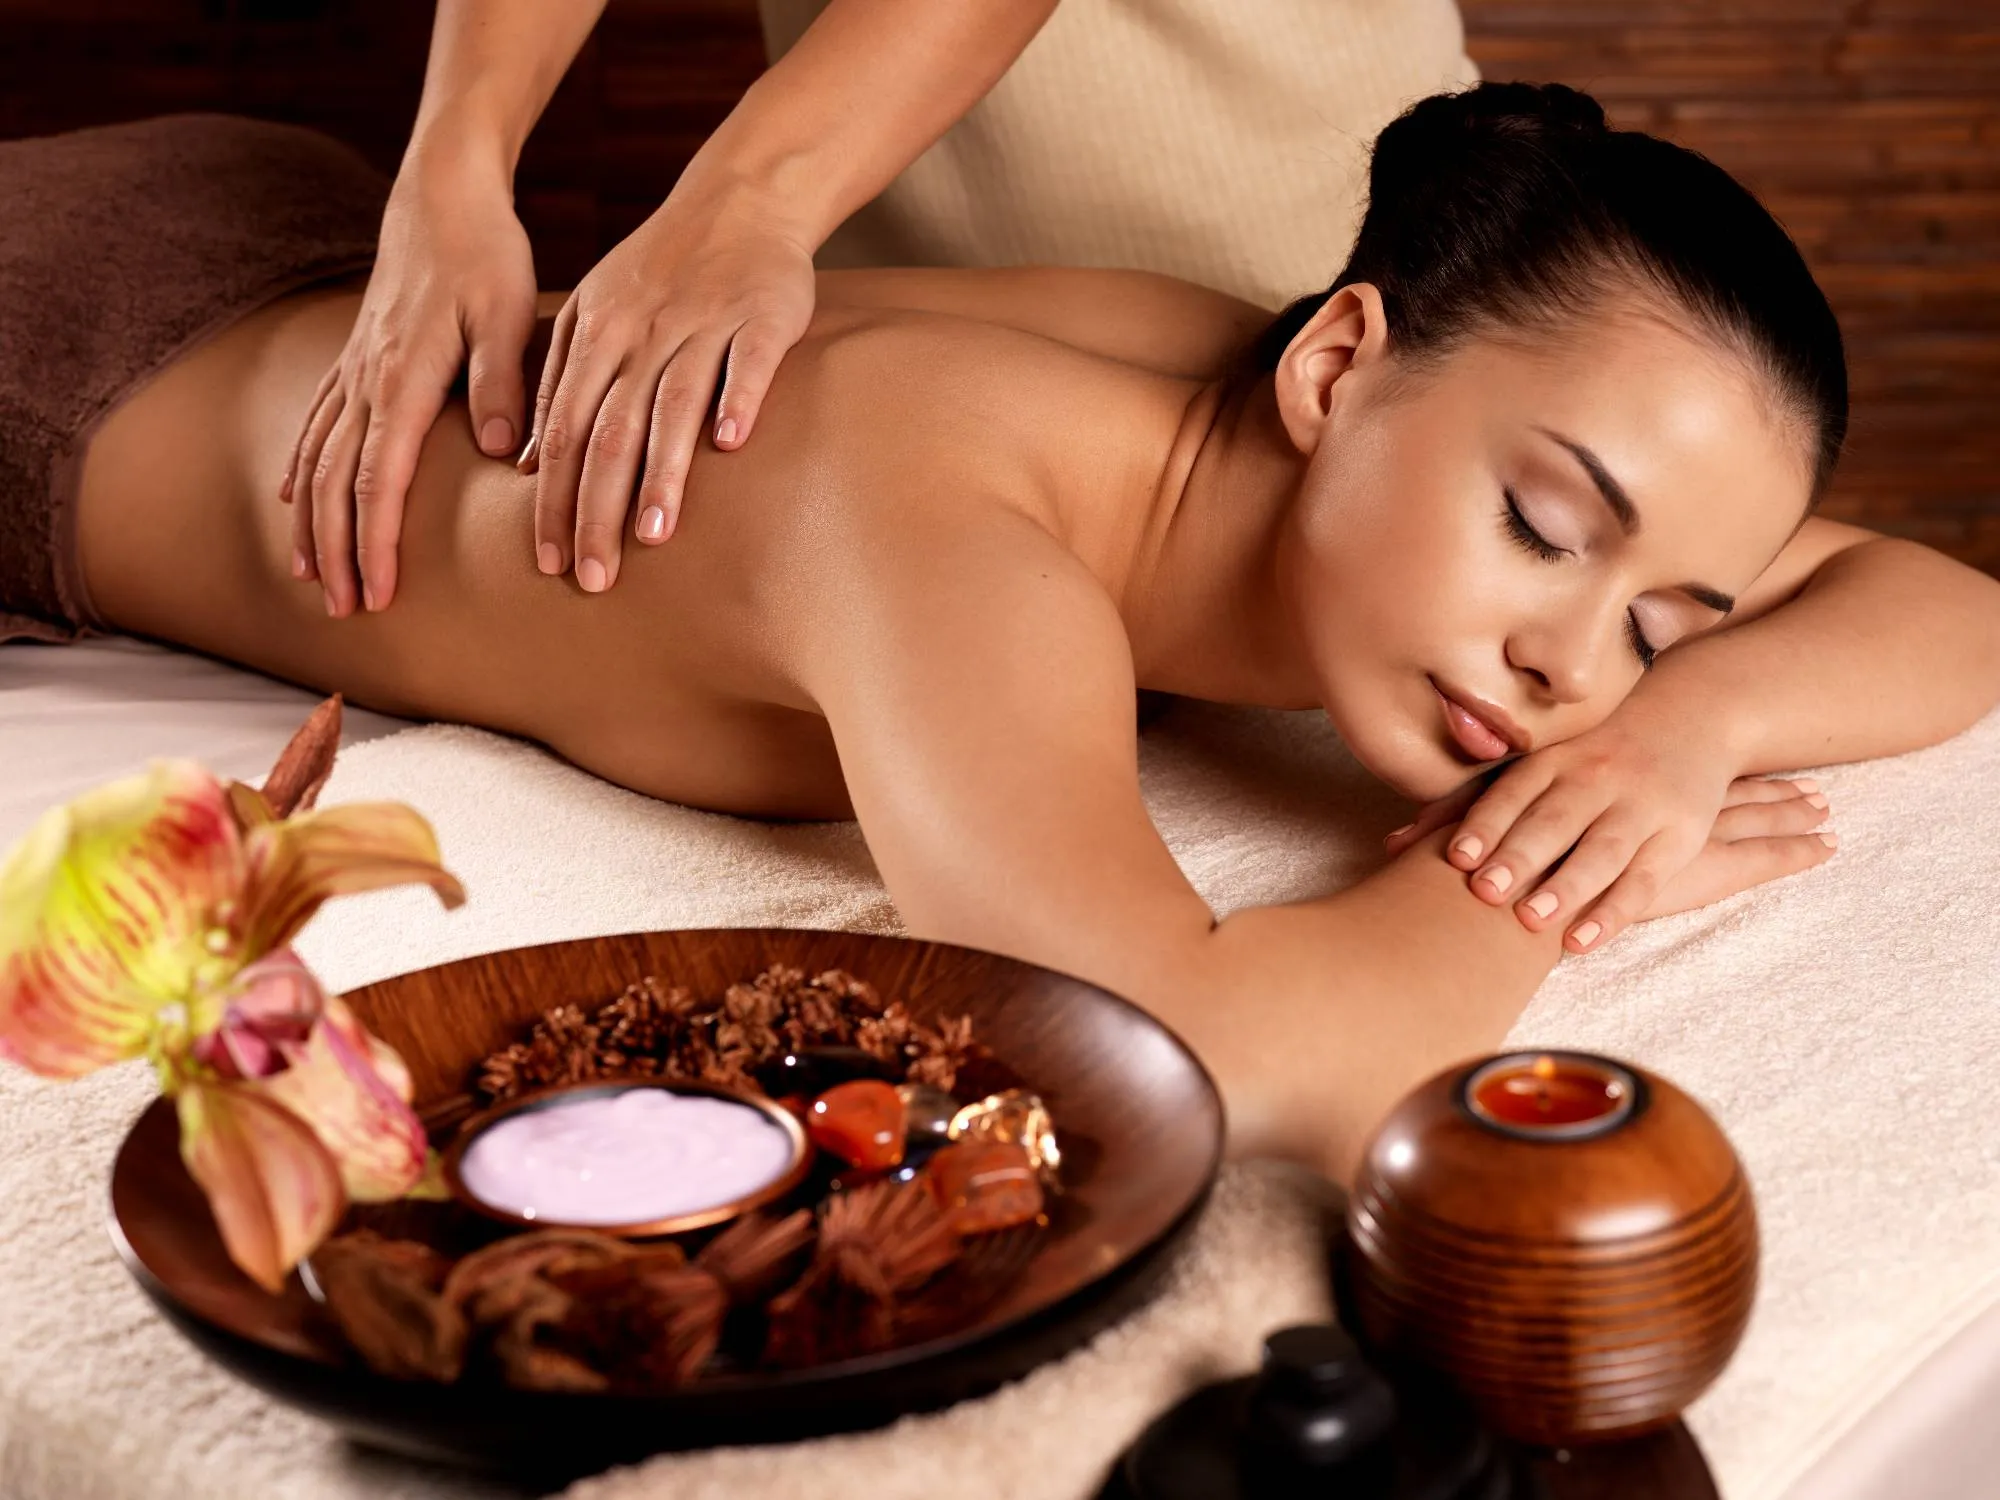 Lust Spa in Thailand, Central Asia | Massage Parlors,Sex-Friendly Places - Rated 0.4